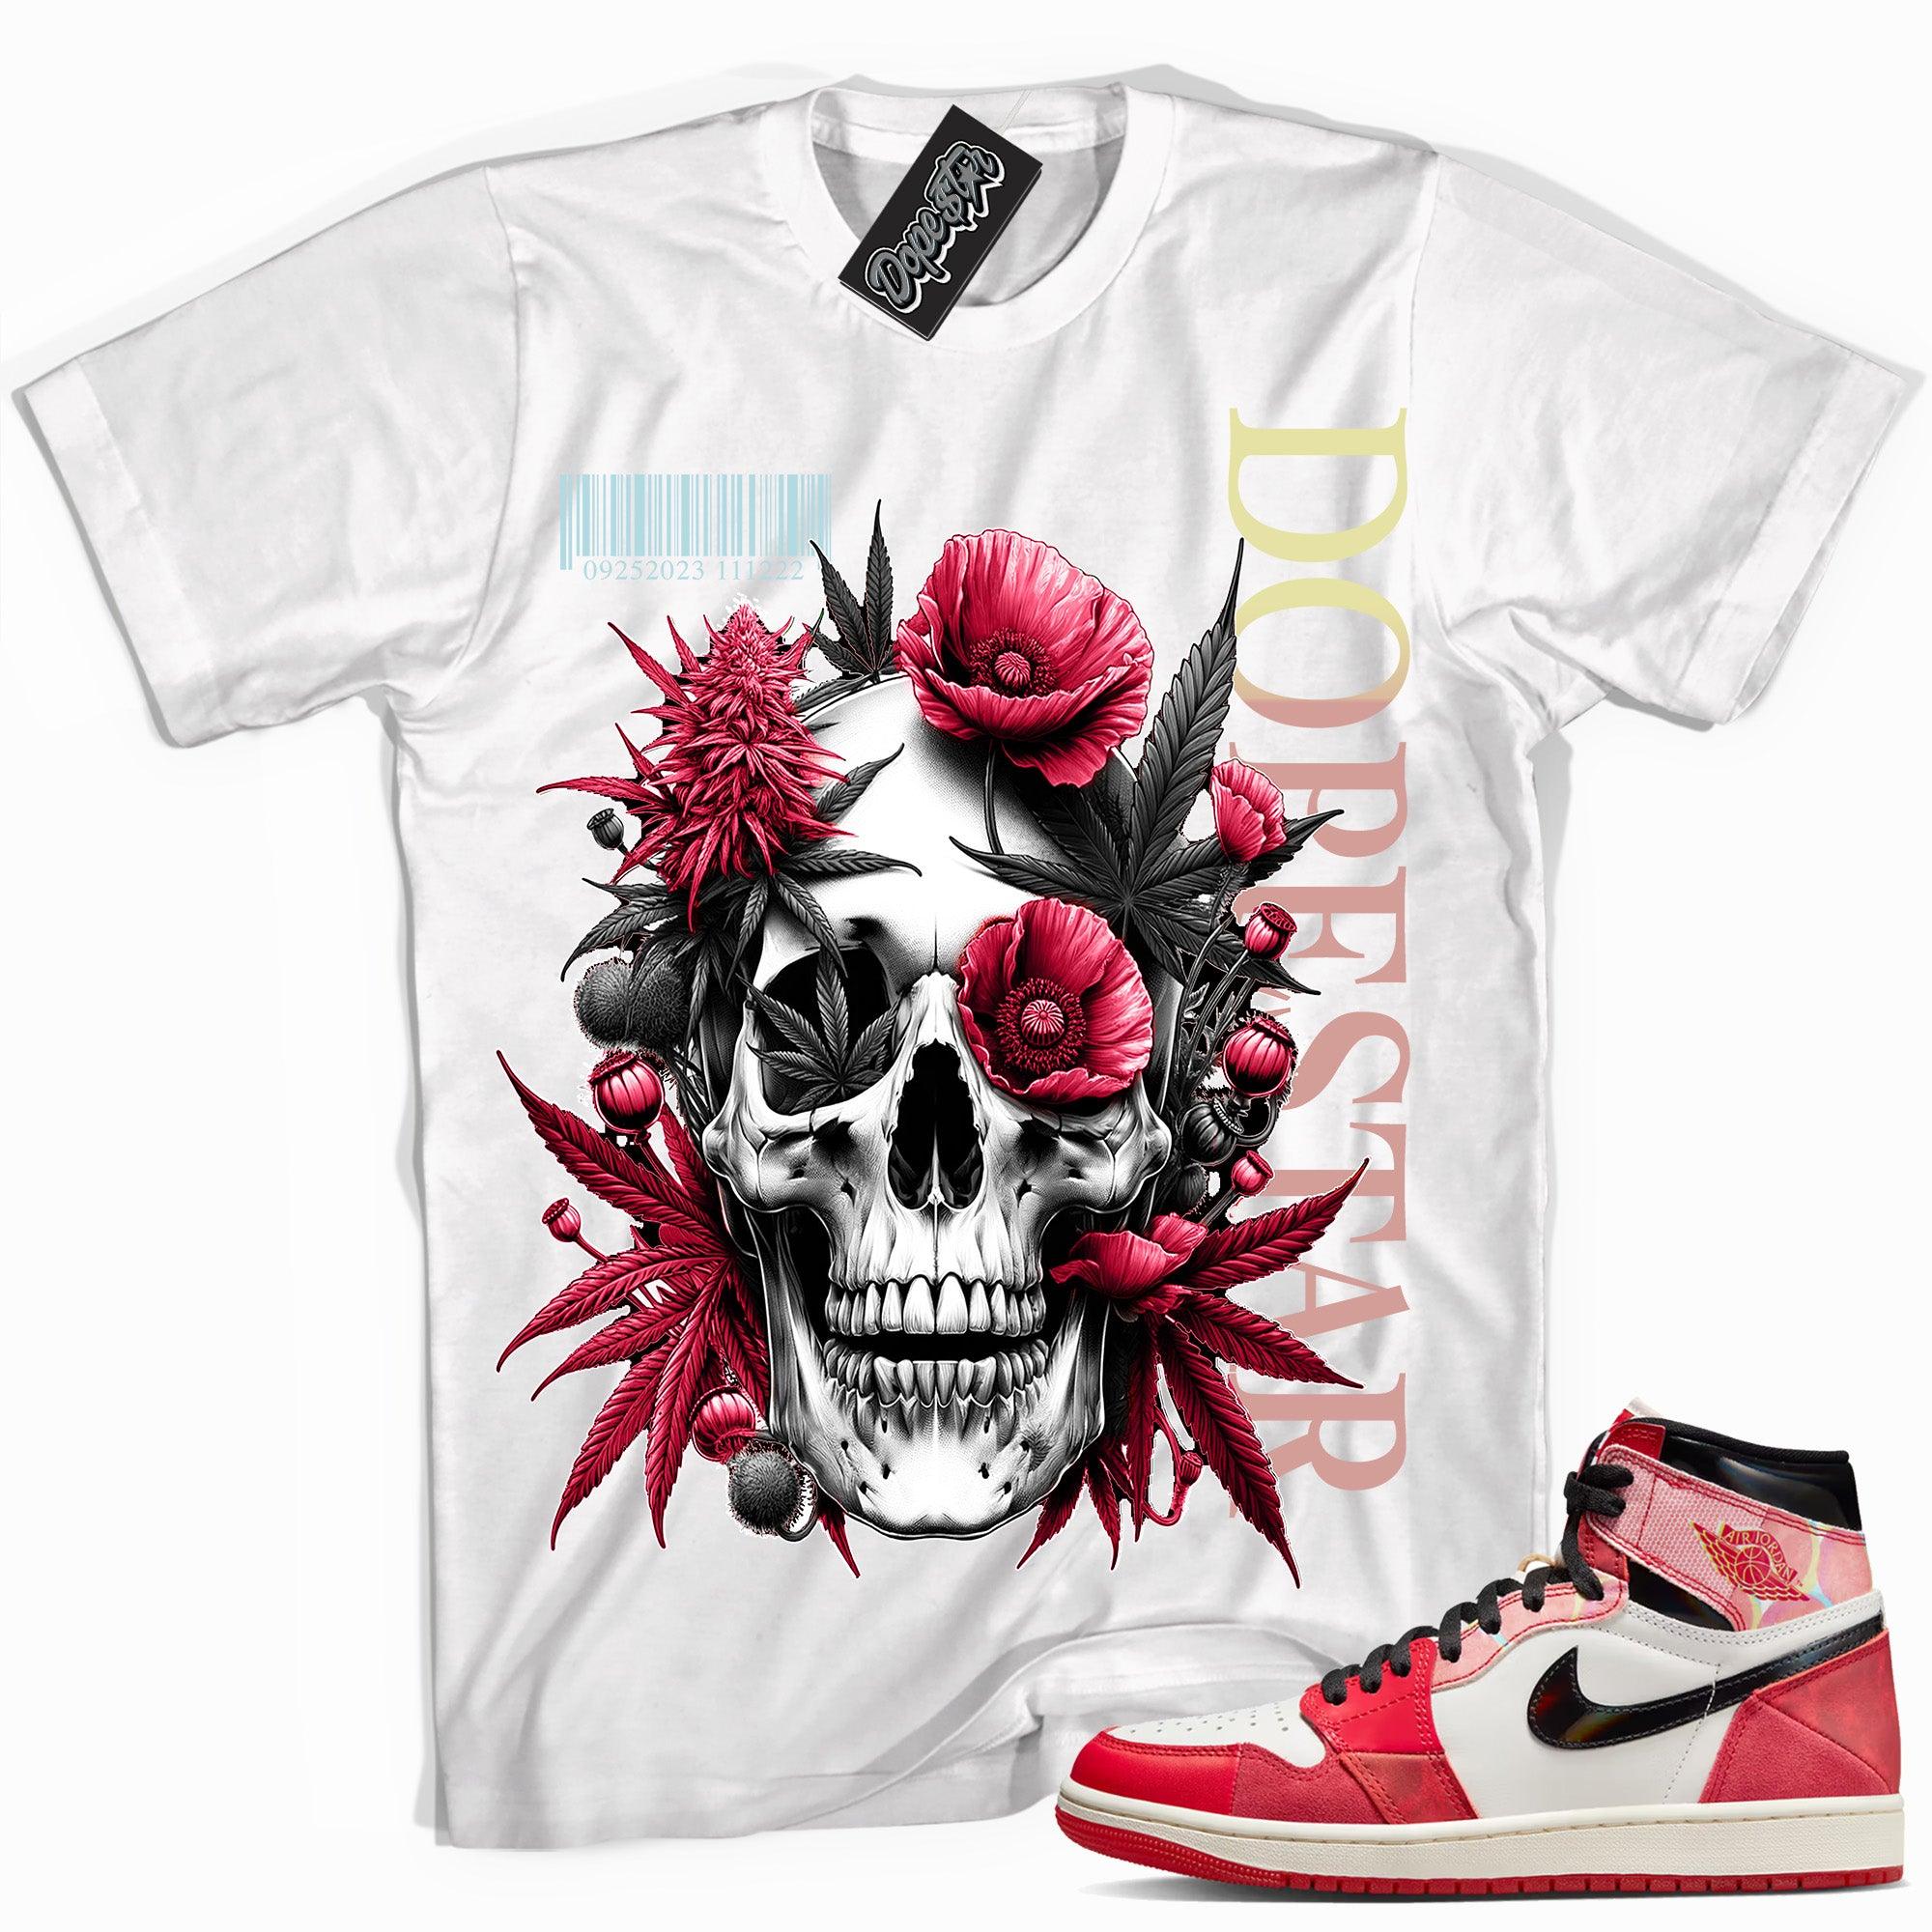 Cool White graphic tee with “ Skull Cannabis Poppies ” print, that perfectly matches AIR JORDAN 1 Retro High OG NEXT CHAPTER SPIDER-VERSE sneakers 